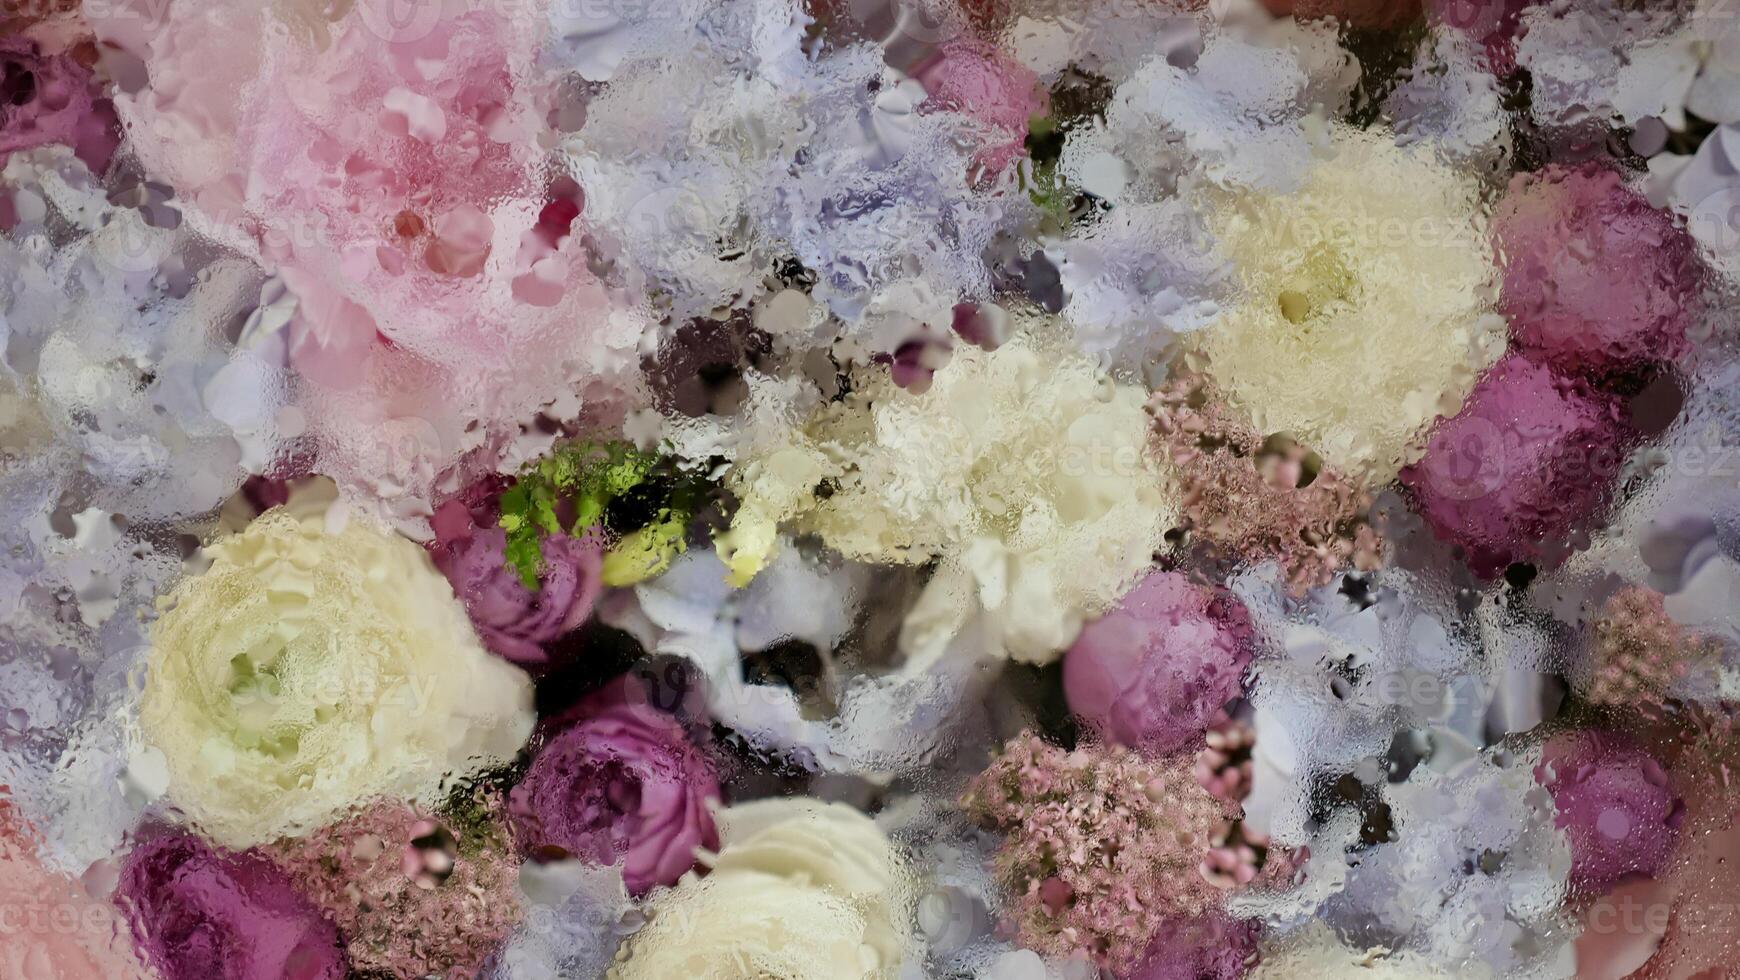 Floral natural blur background with blue gardenia, pink rose, white chrysanthemum close-up photo